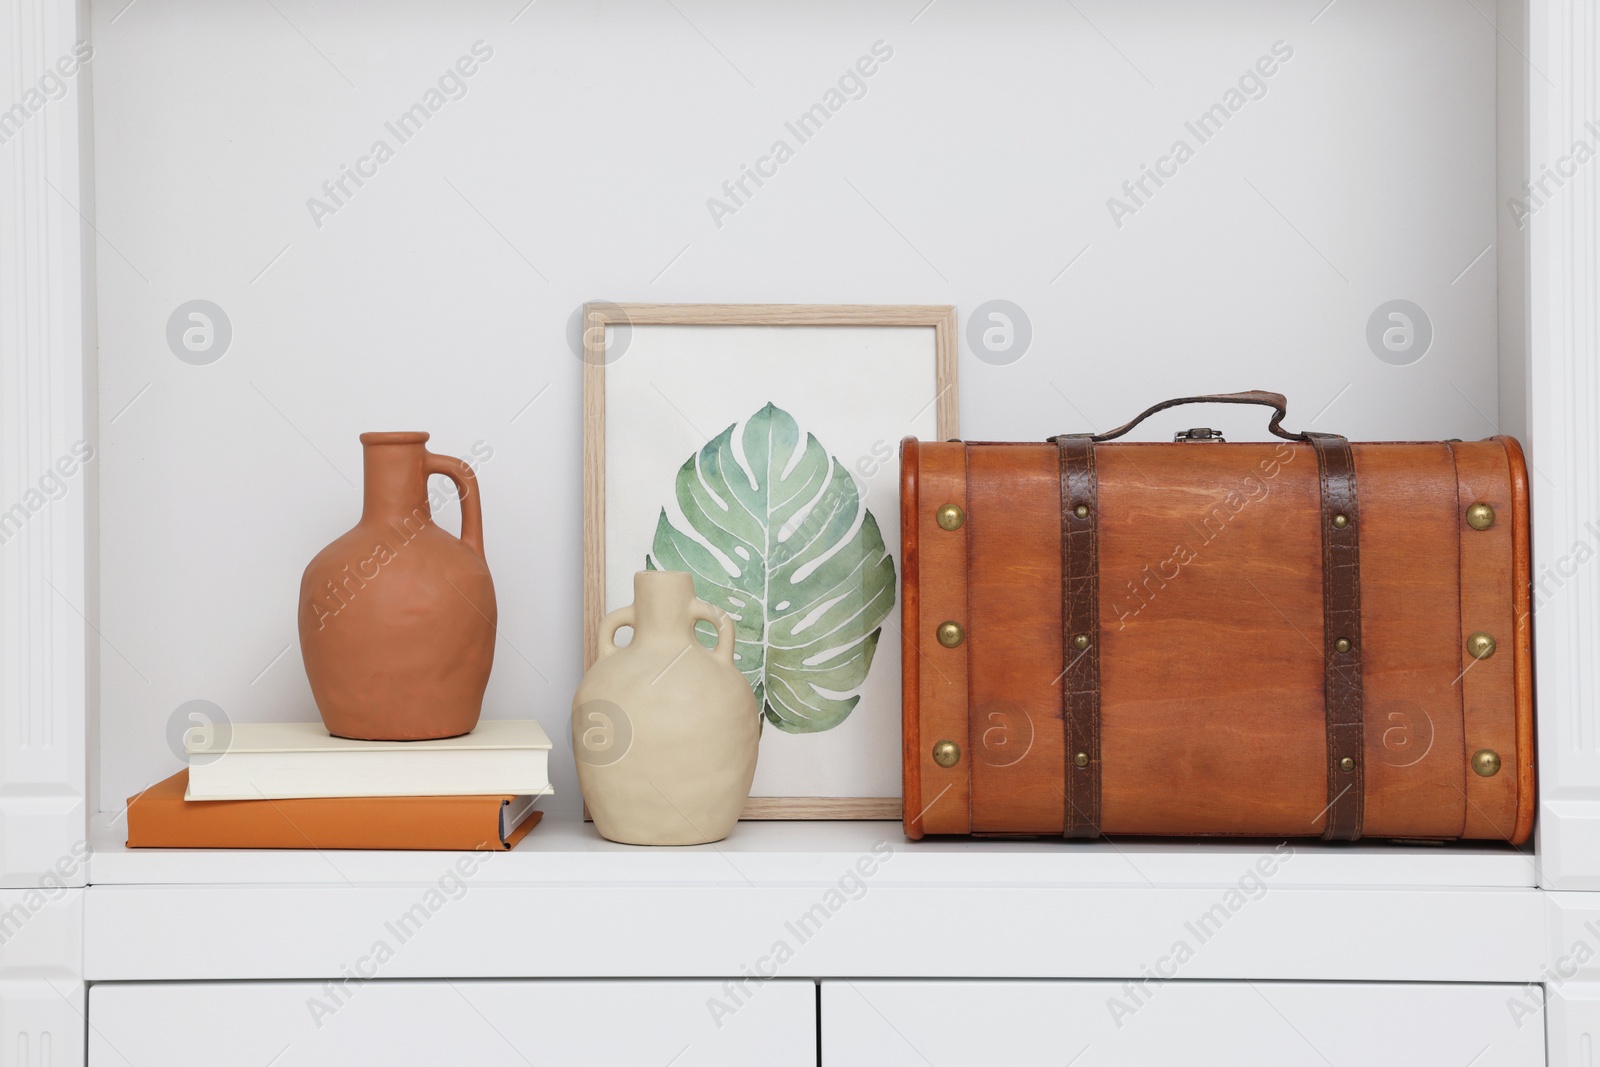 Photo of Brown suitcase, vases, books and picture on shelving unit indoors